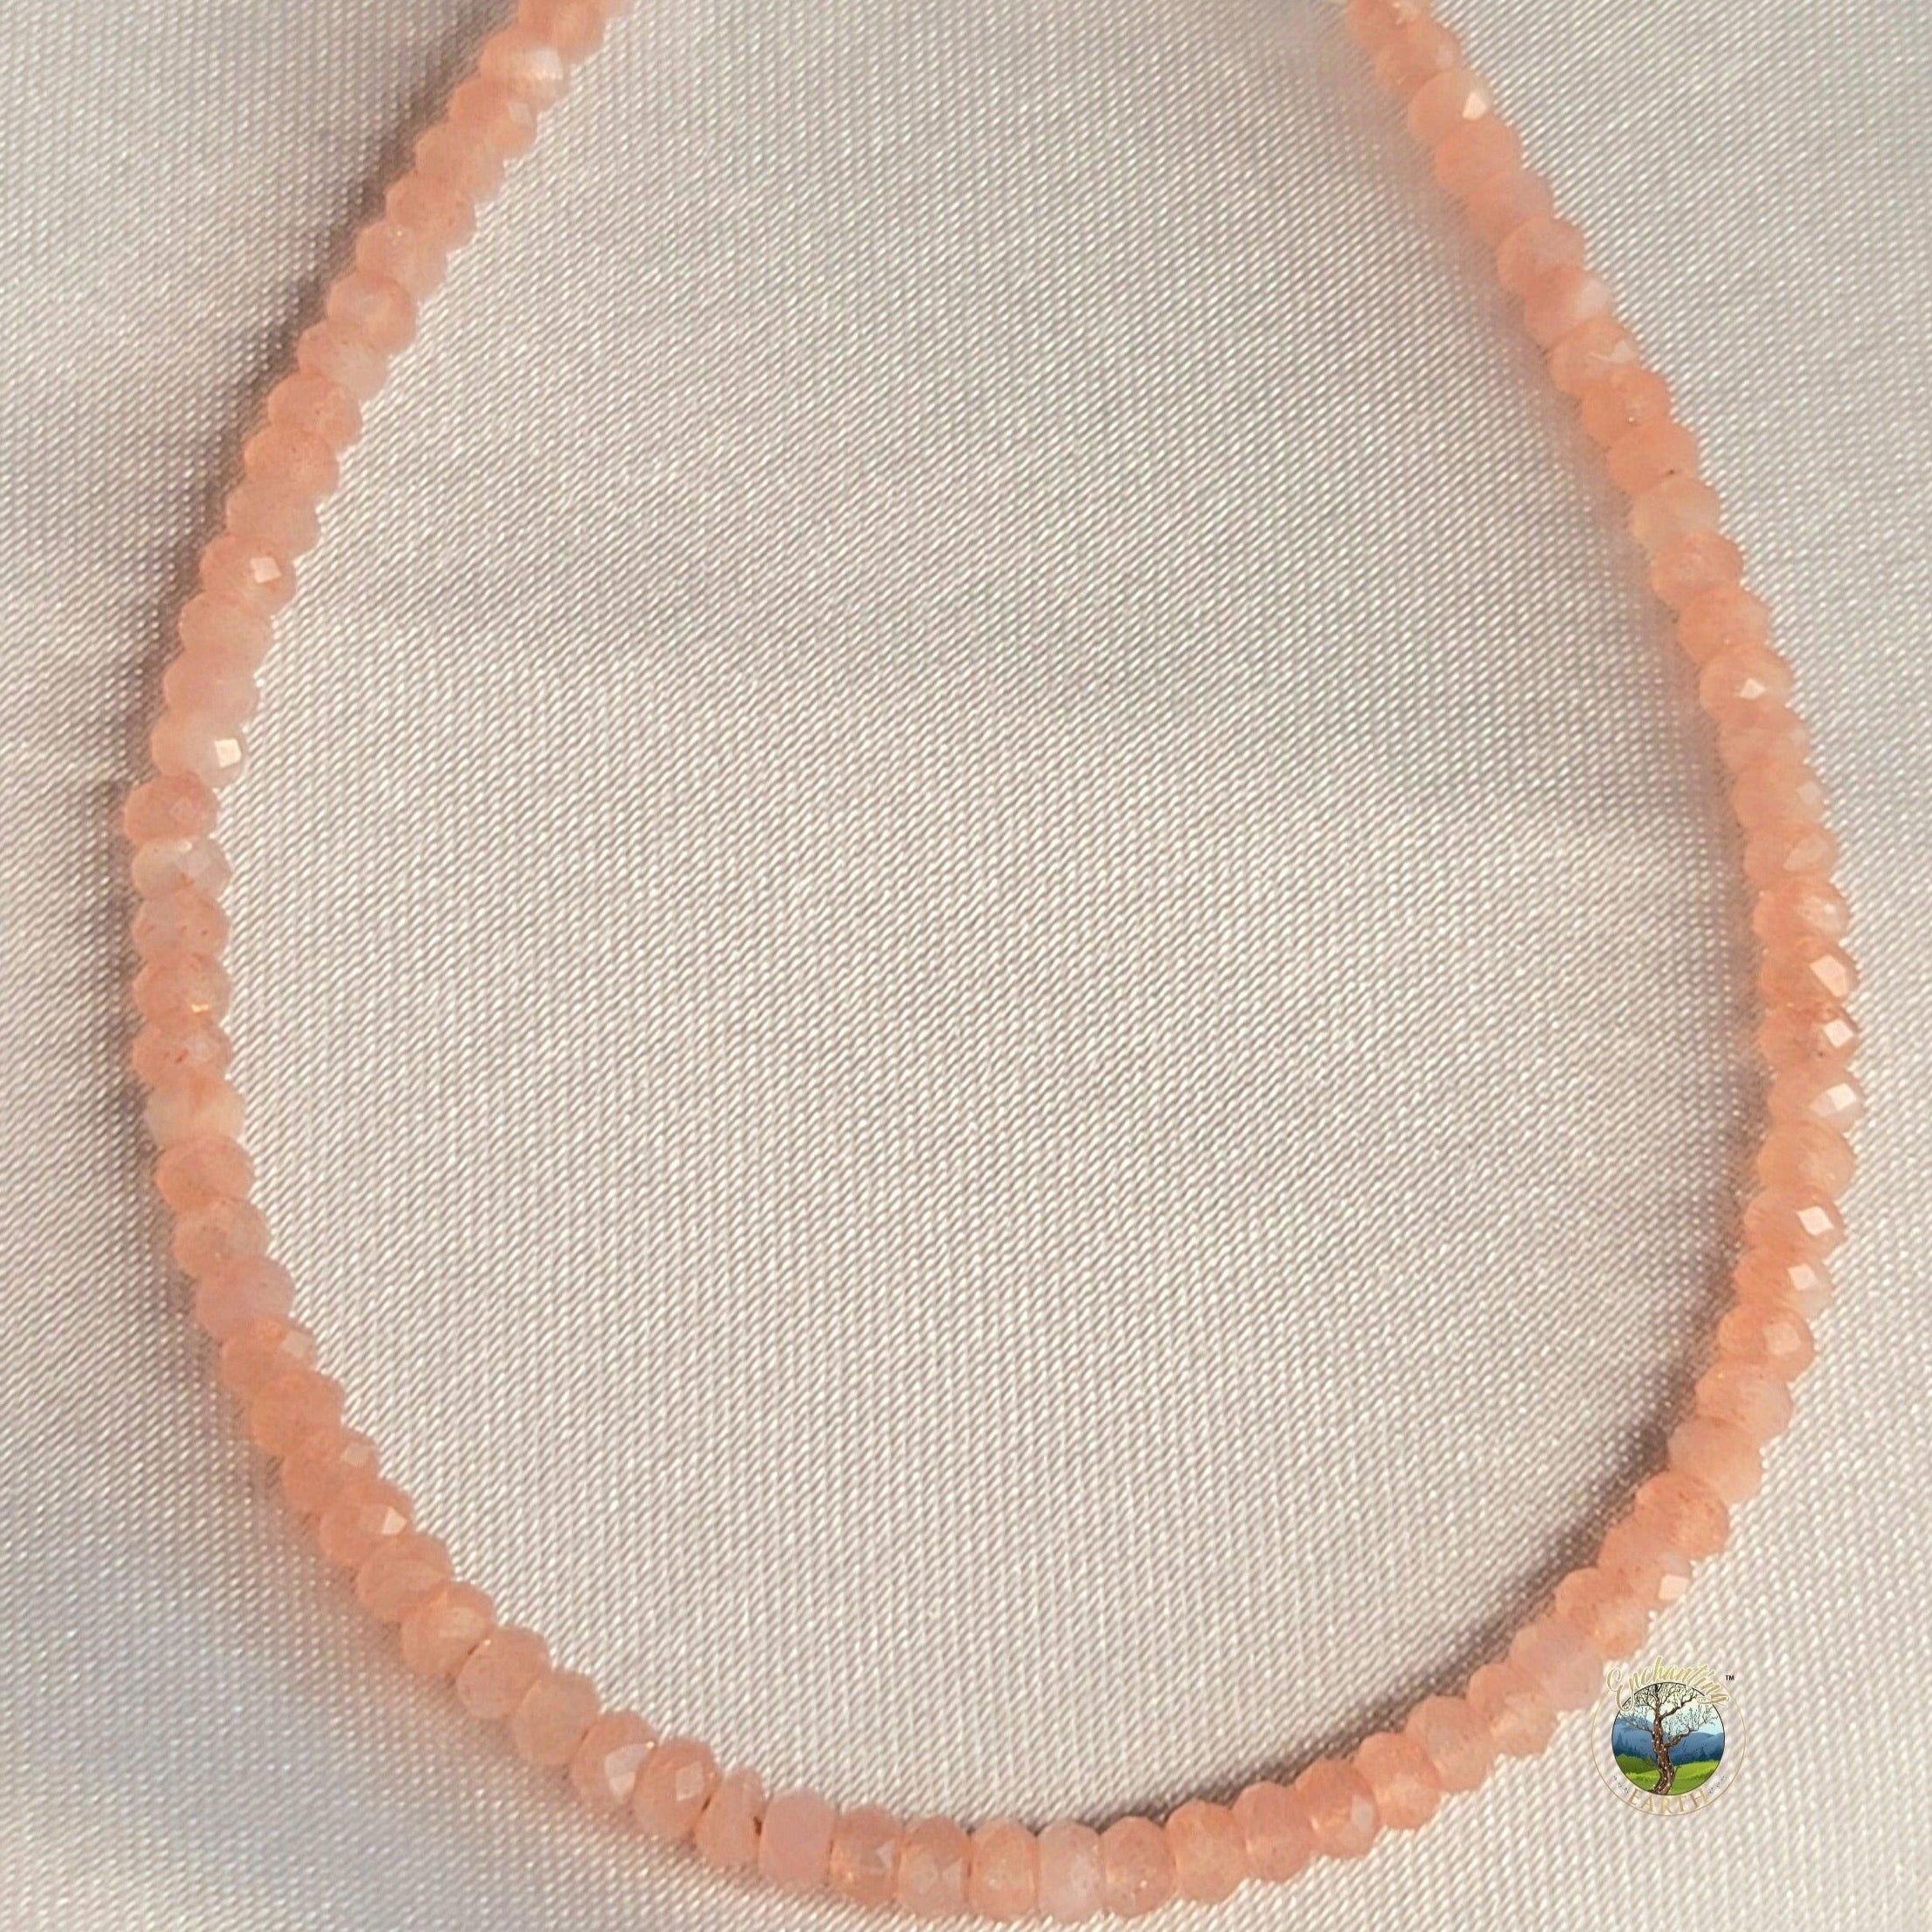 Peach Moonstone Micro Faceted Bracelet Artistic Expression, Creativity & Manifestation